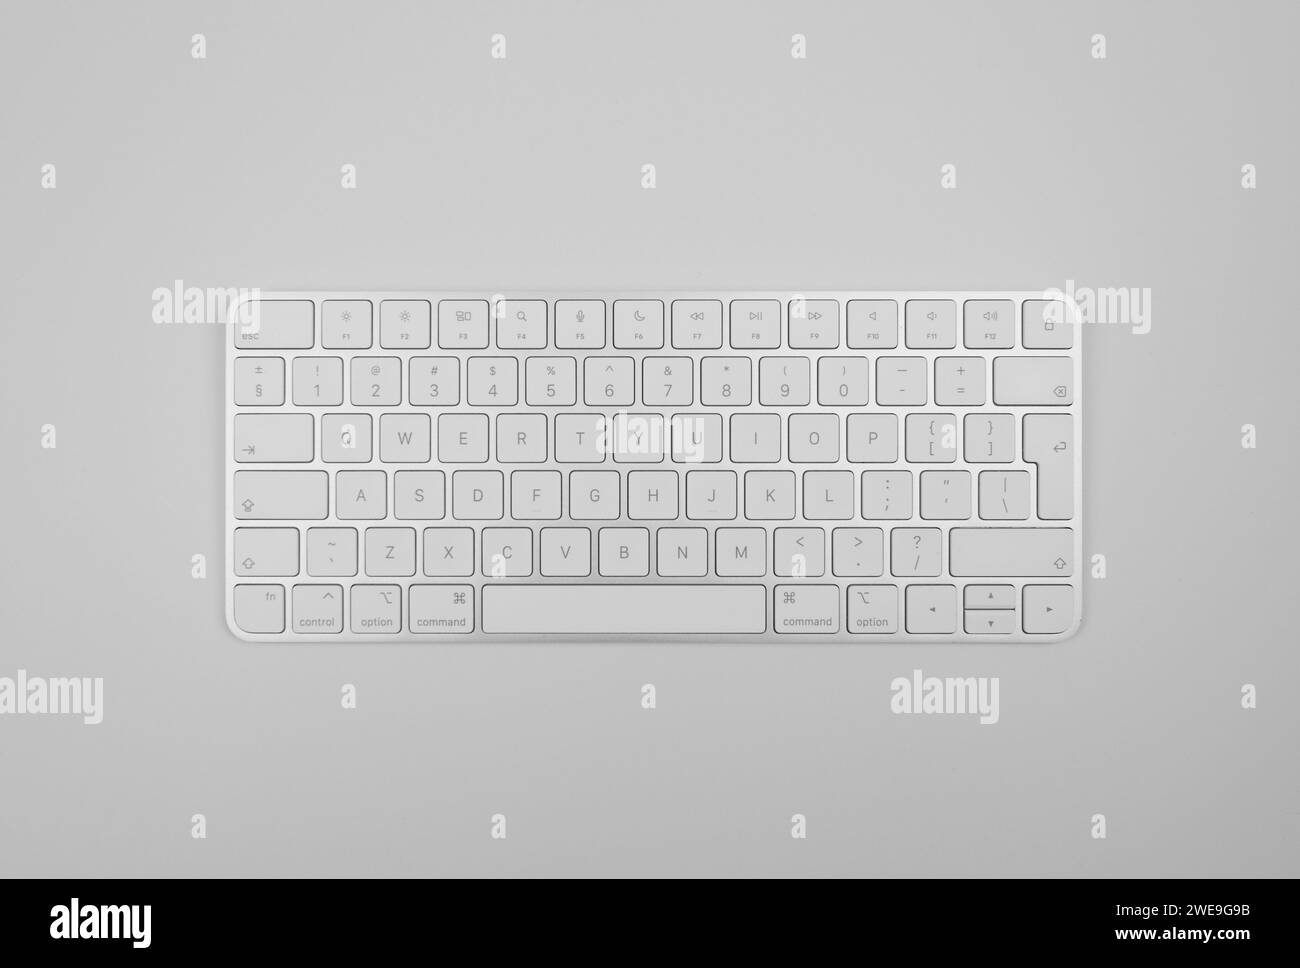 Top view of white keyboard on light grey background. Modern office flat lay, copy space. Stock Photo